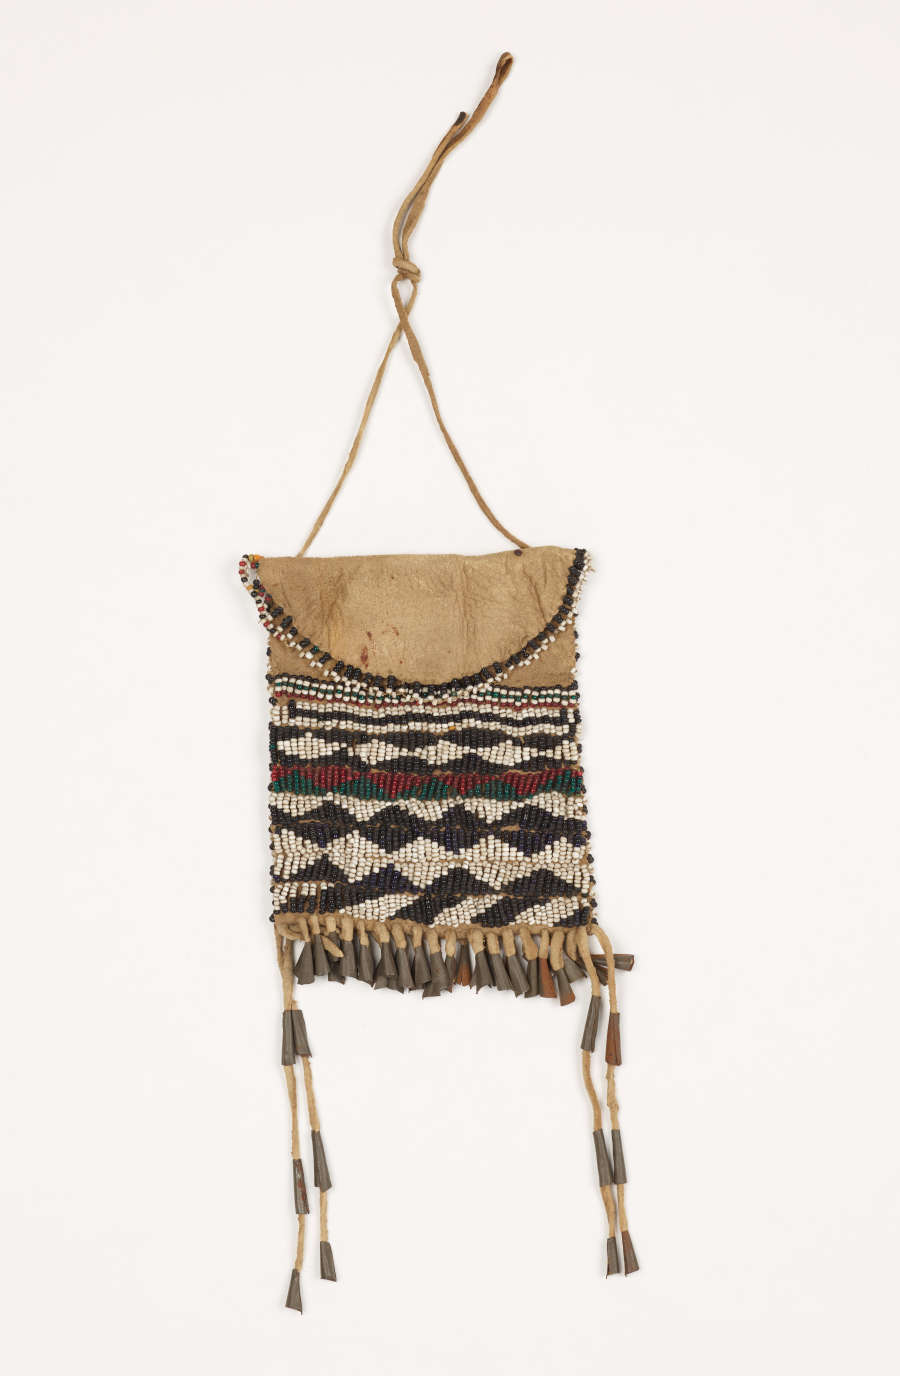 A leather beaded pouch with white, black, red, and green beaded designs. There is a handle as well as fringes with metal and leather decorations.
